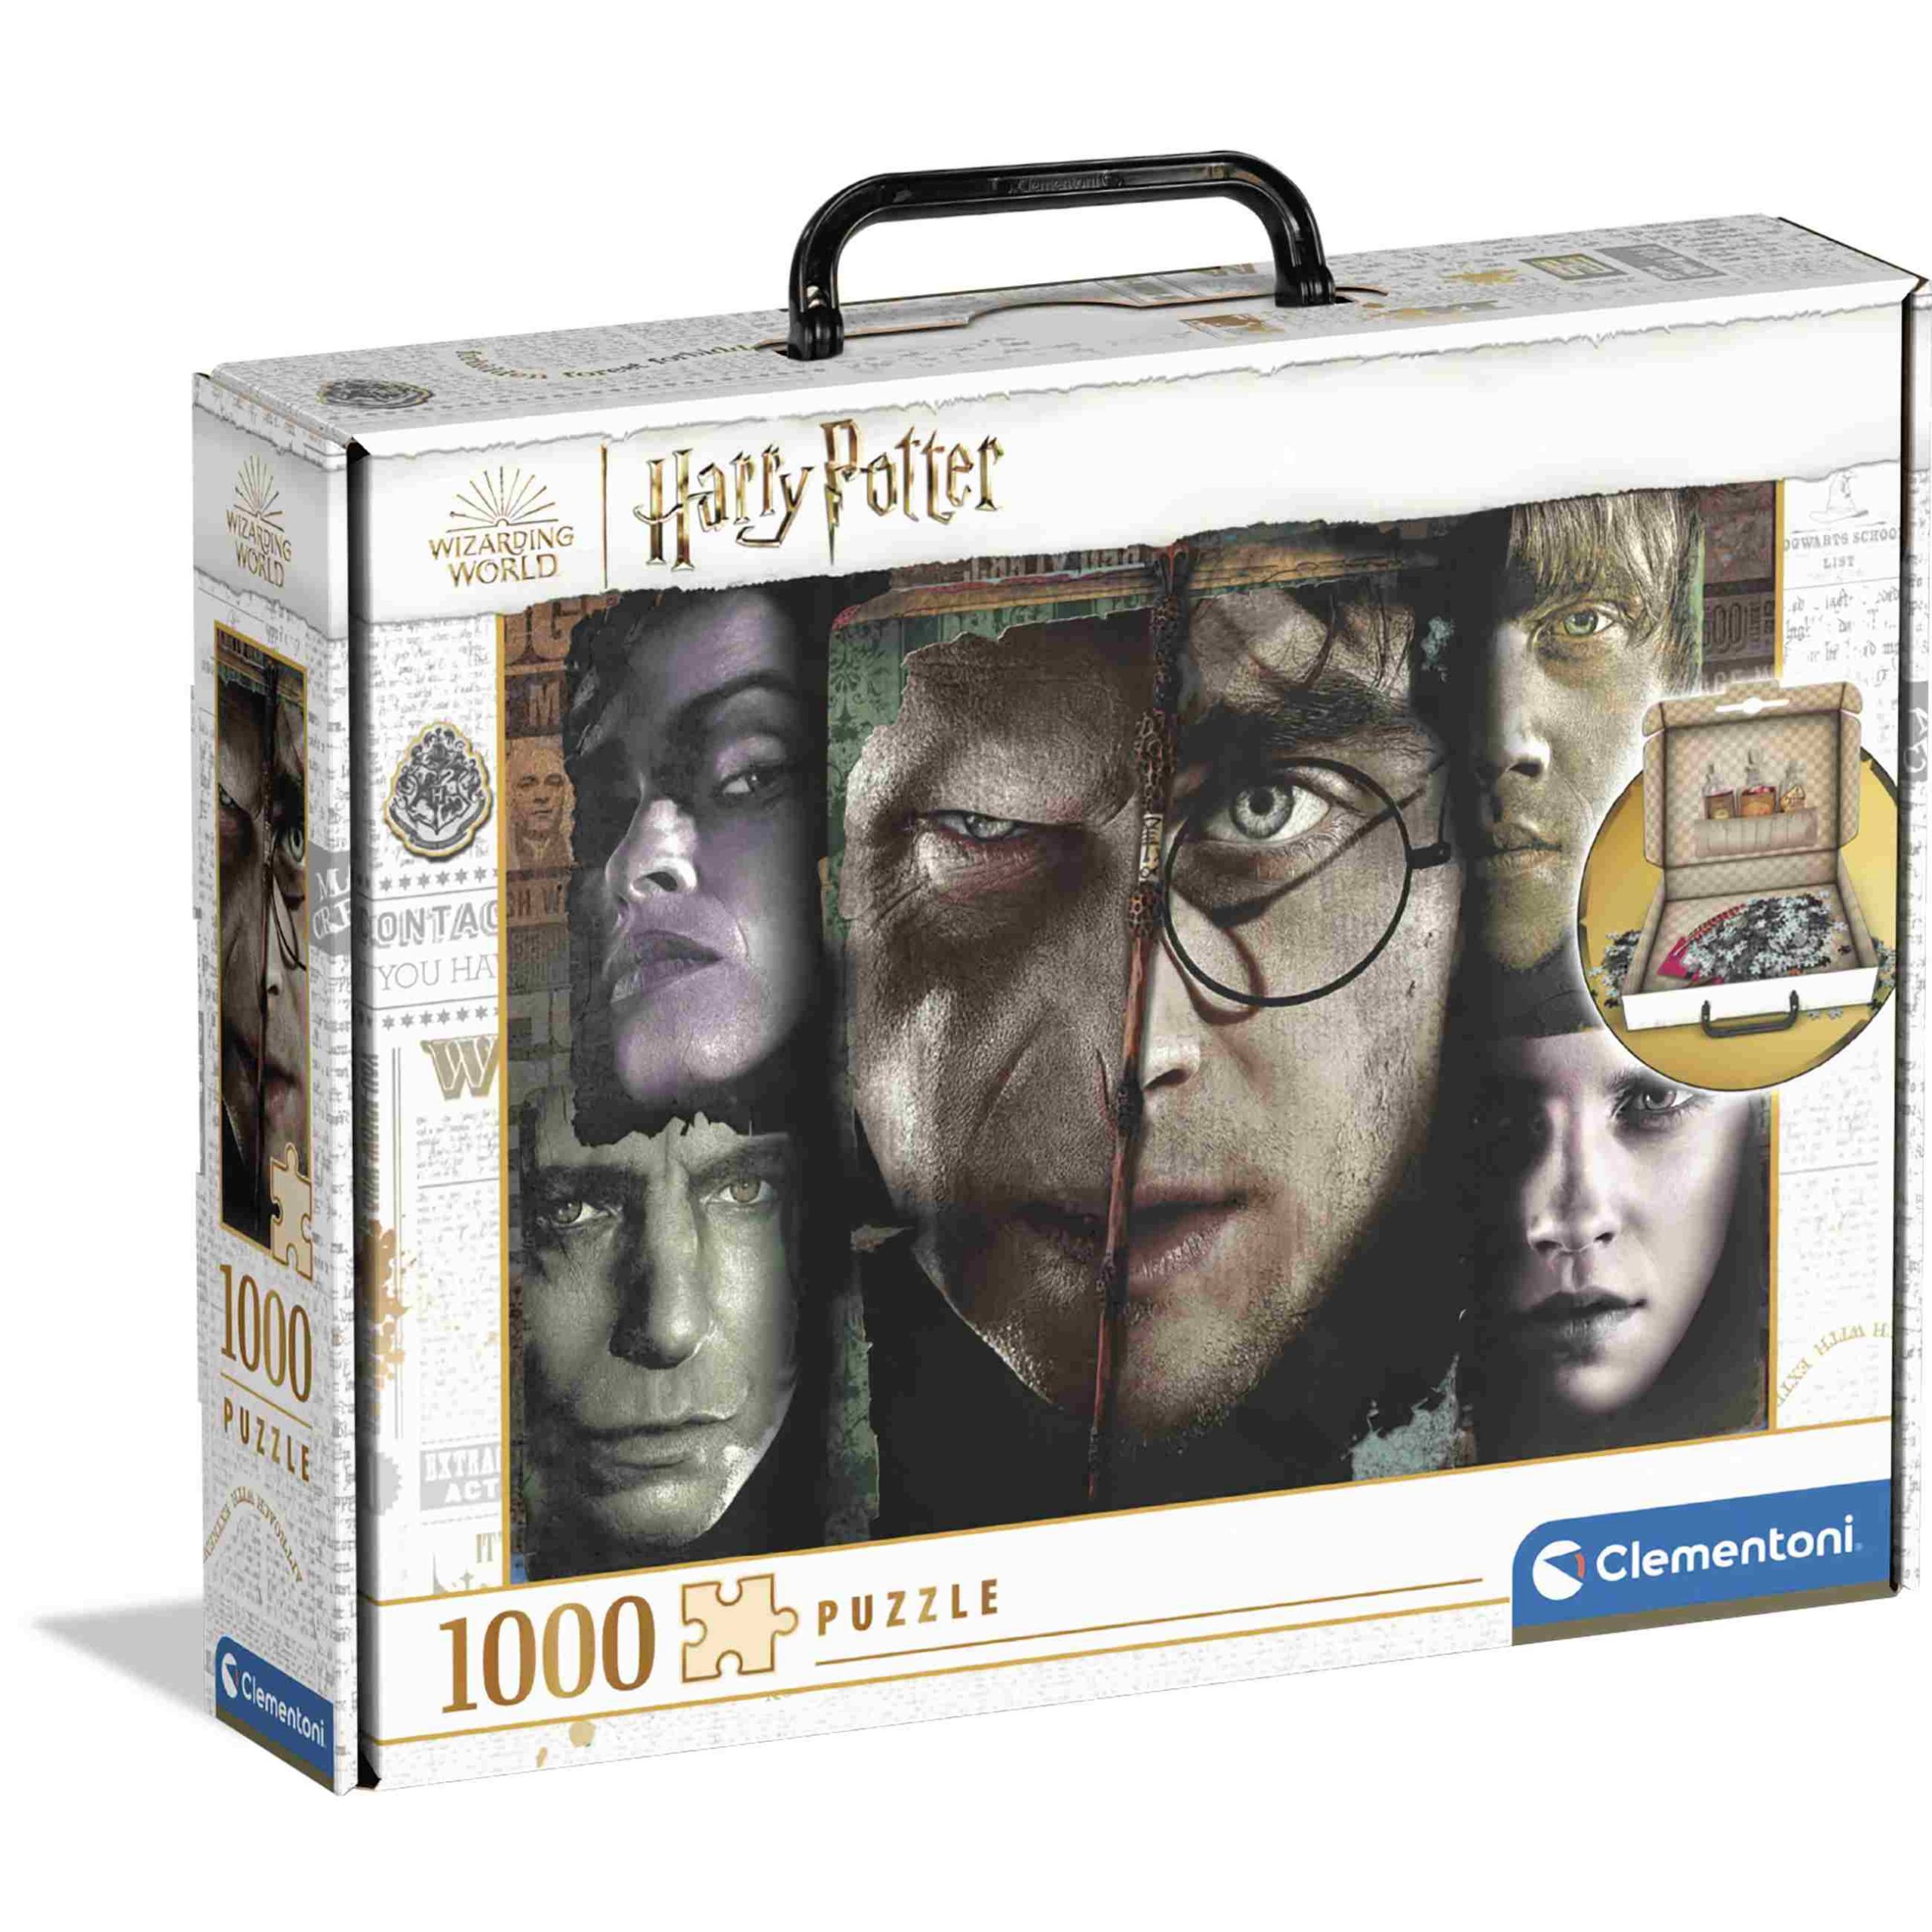 Clementoni puzzle harry potter in valigetta (b) - 1000 pezzi - CLEMENTONI, Harry Potter